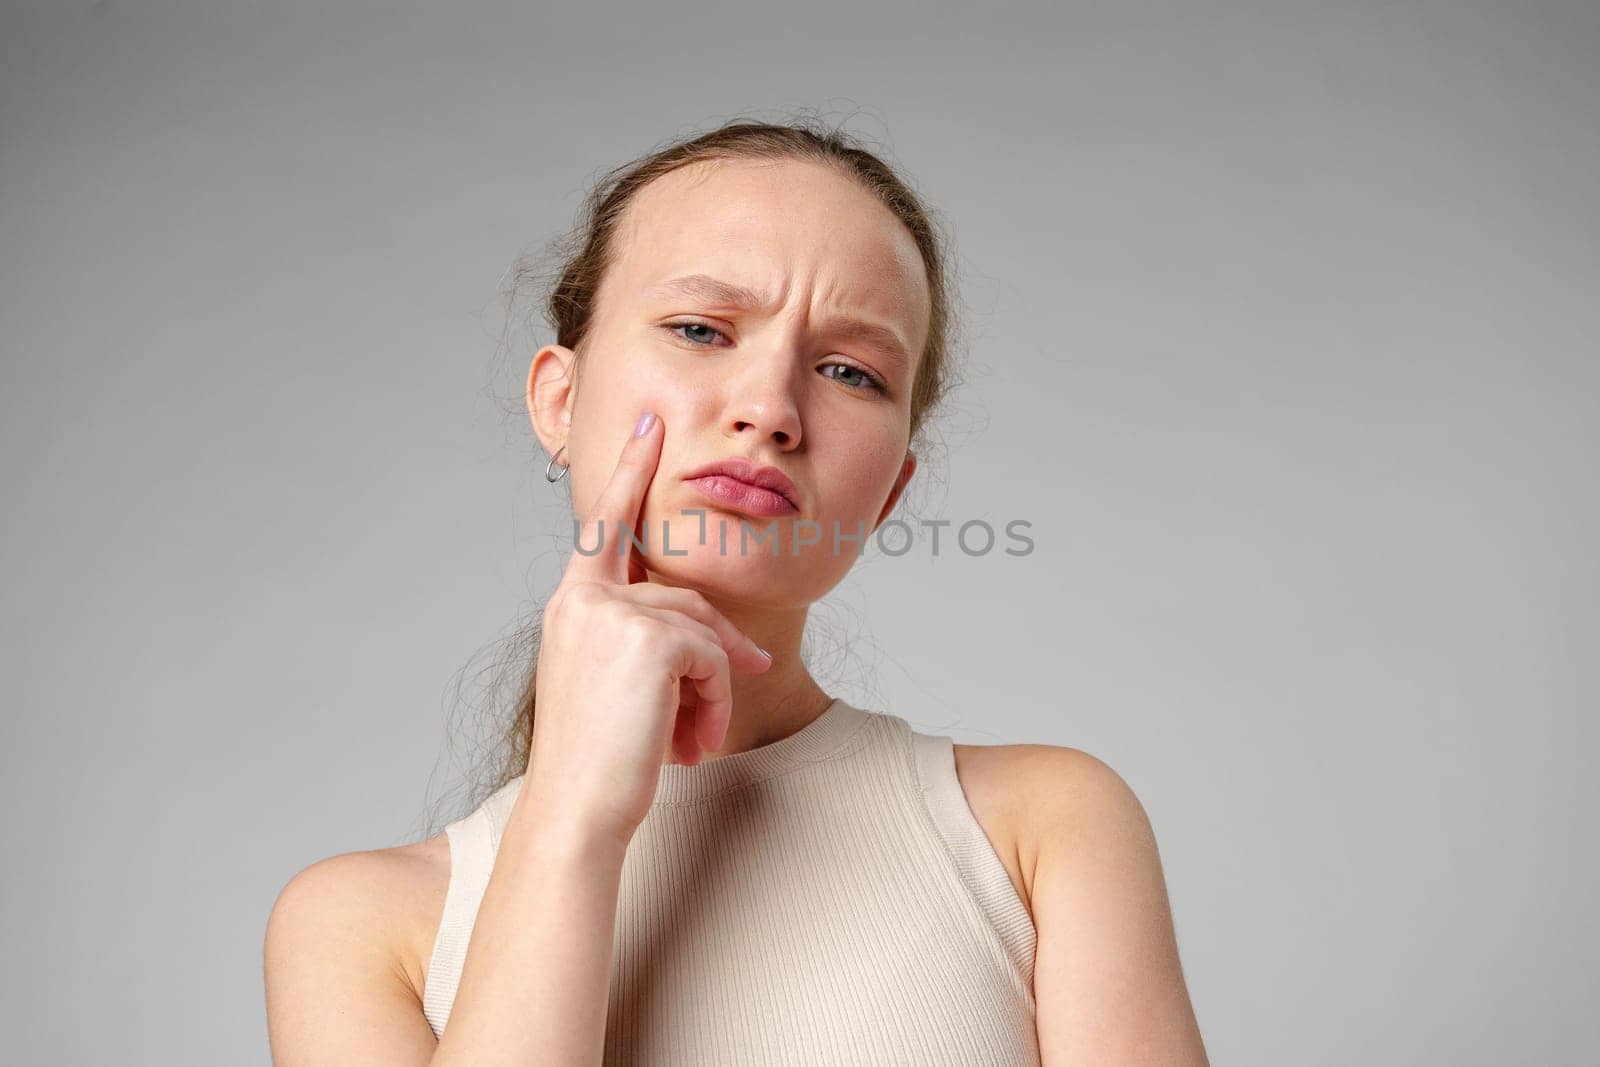 Young Woman Posing deep in thought on gray background close up